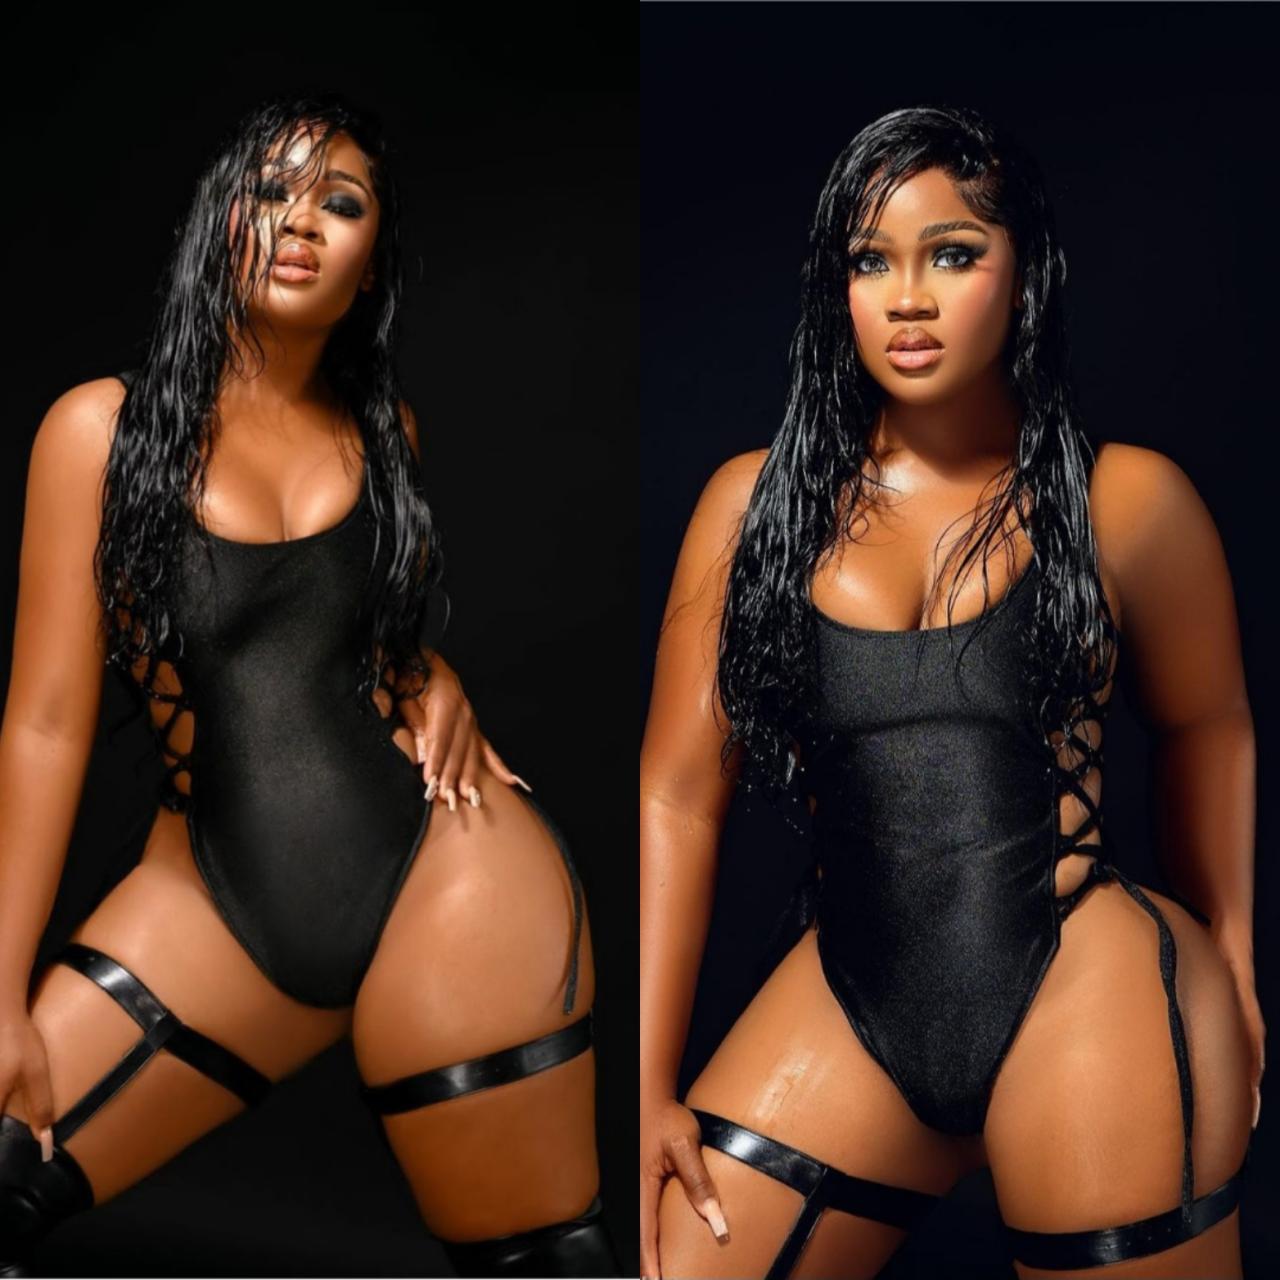 Cee C flaunts her curves in risqu� photos as she turns 31